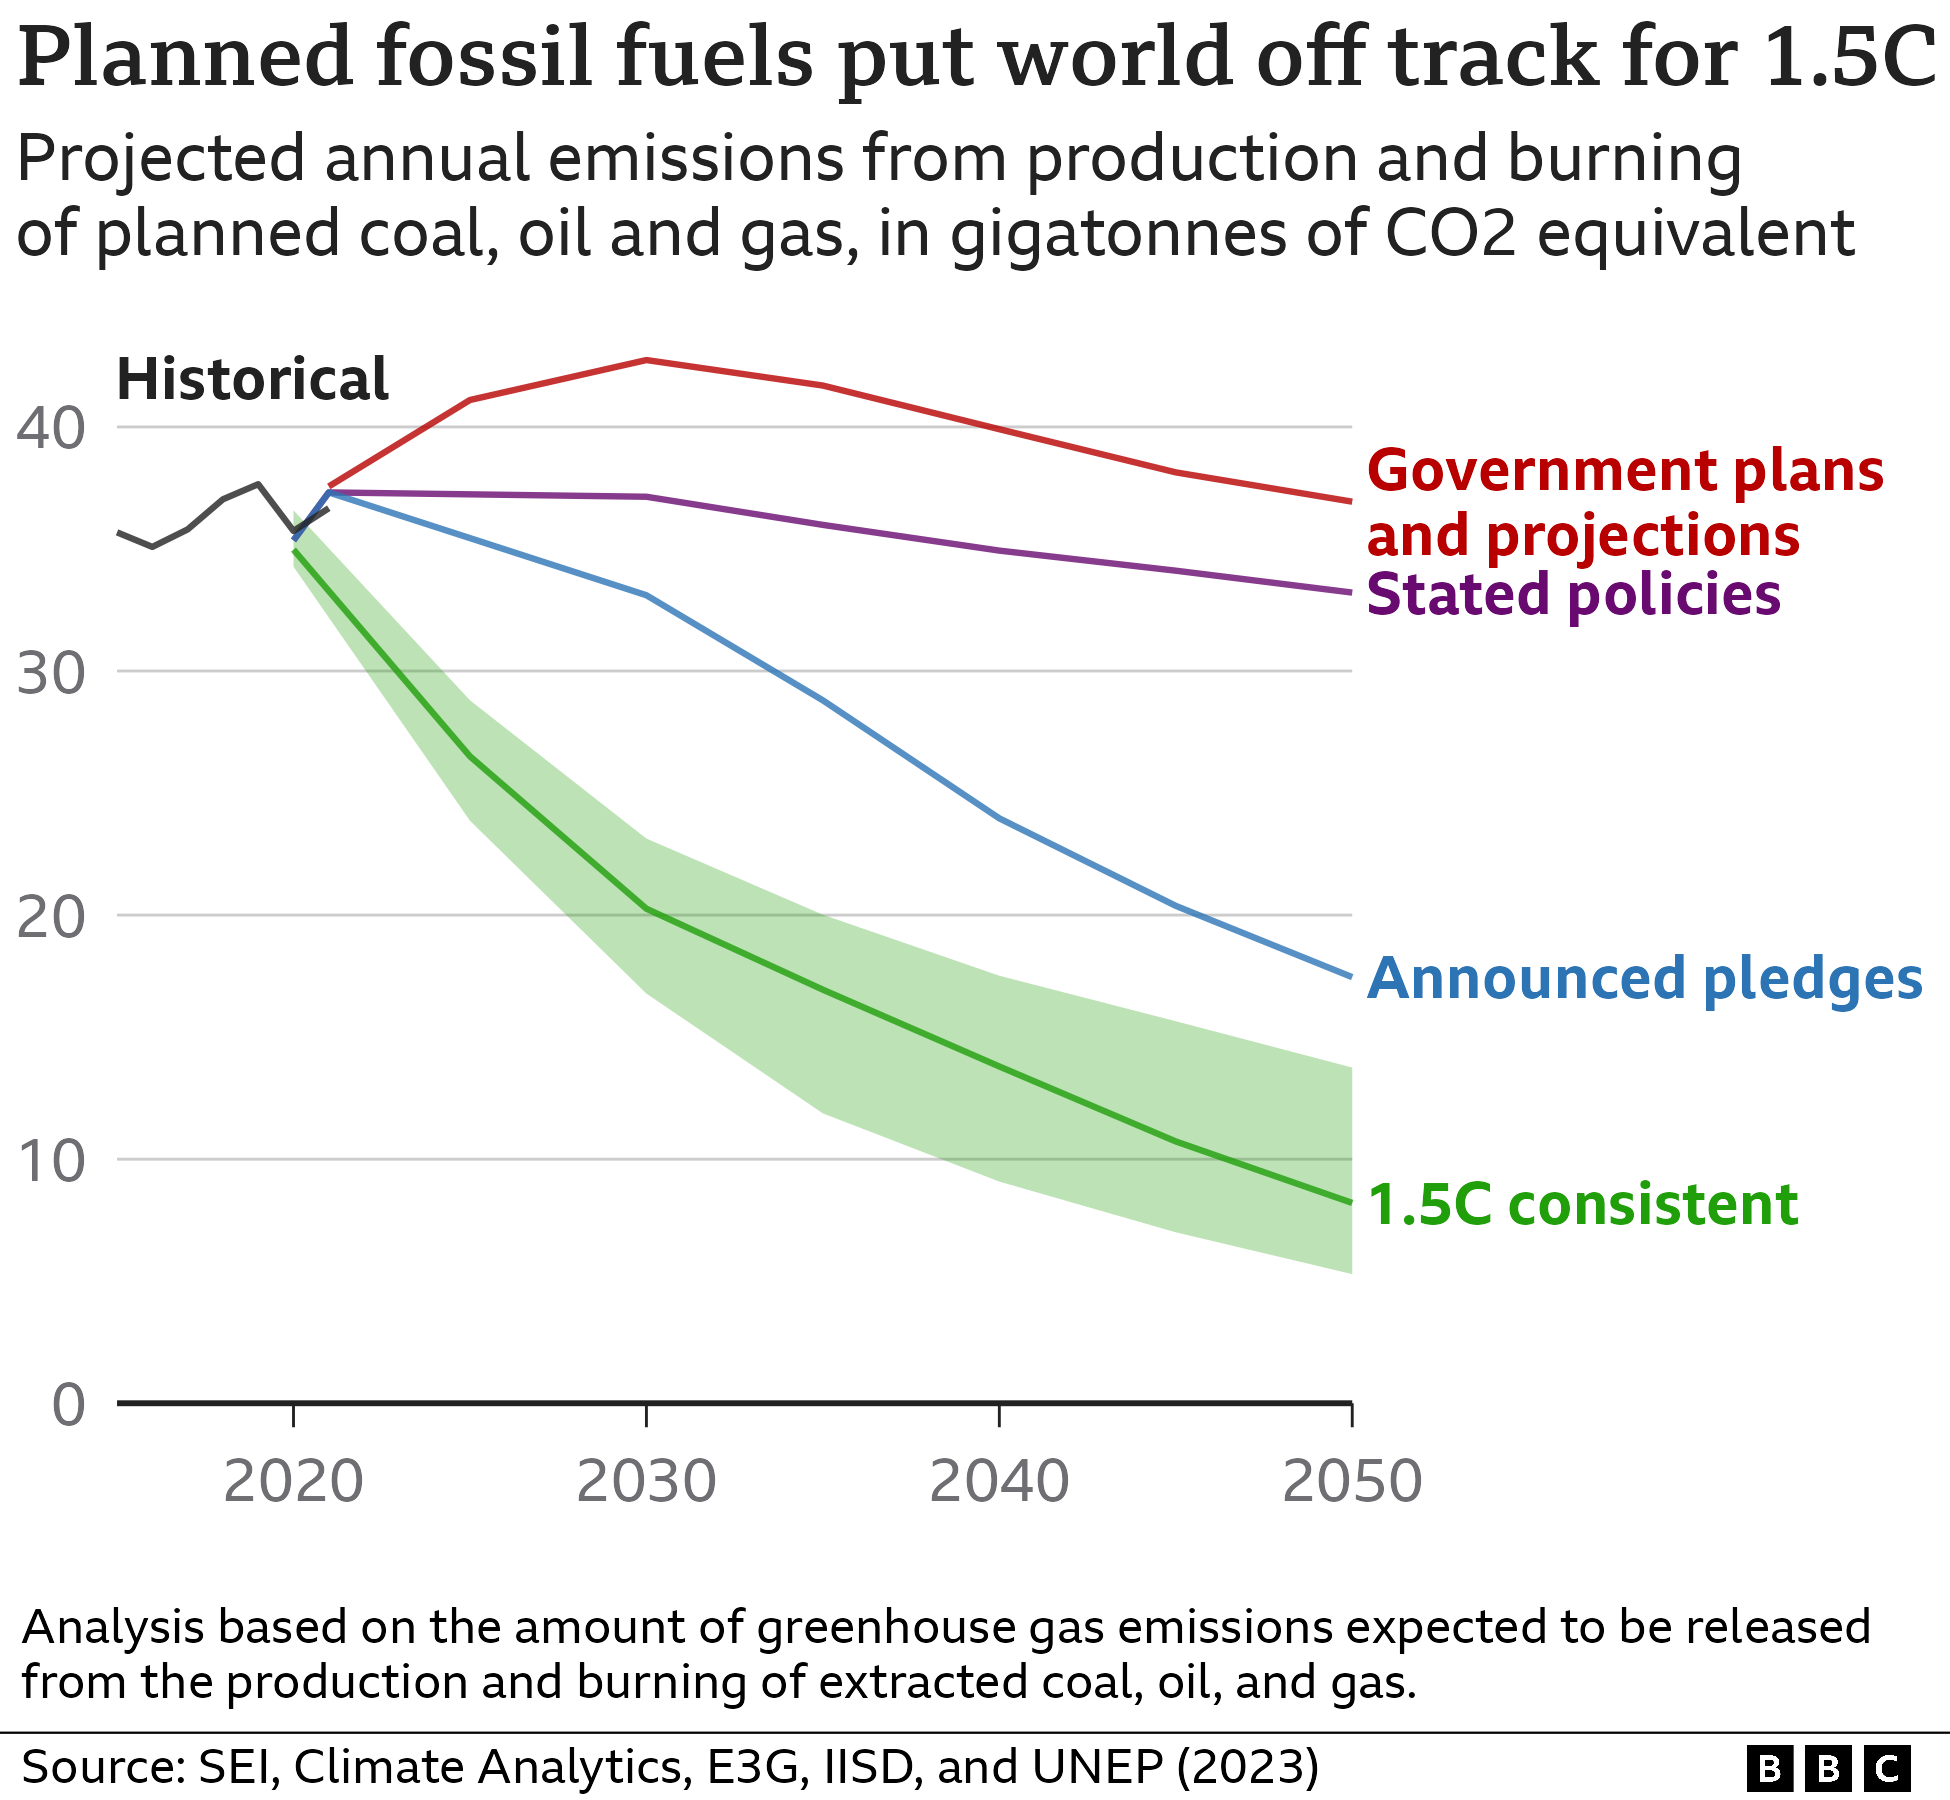 Planned fossil fuels put the world well off track for 1.5C. Line graph showing expected emissions to 2050 from fossil fuel production under four scenarios: government plans and projections (highest emissions), stated policies, announced pledges, and the scenario consistent with 1.5C (lowest emissions).